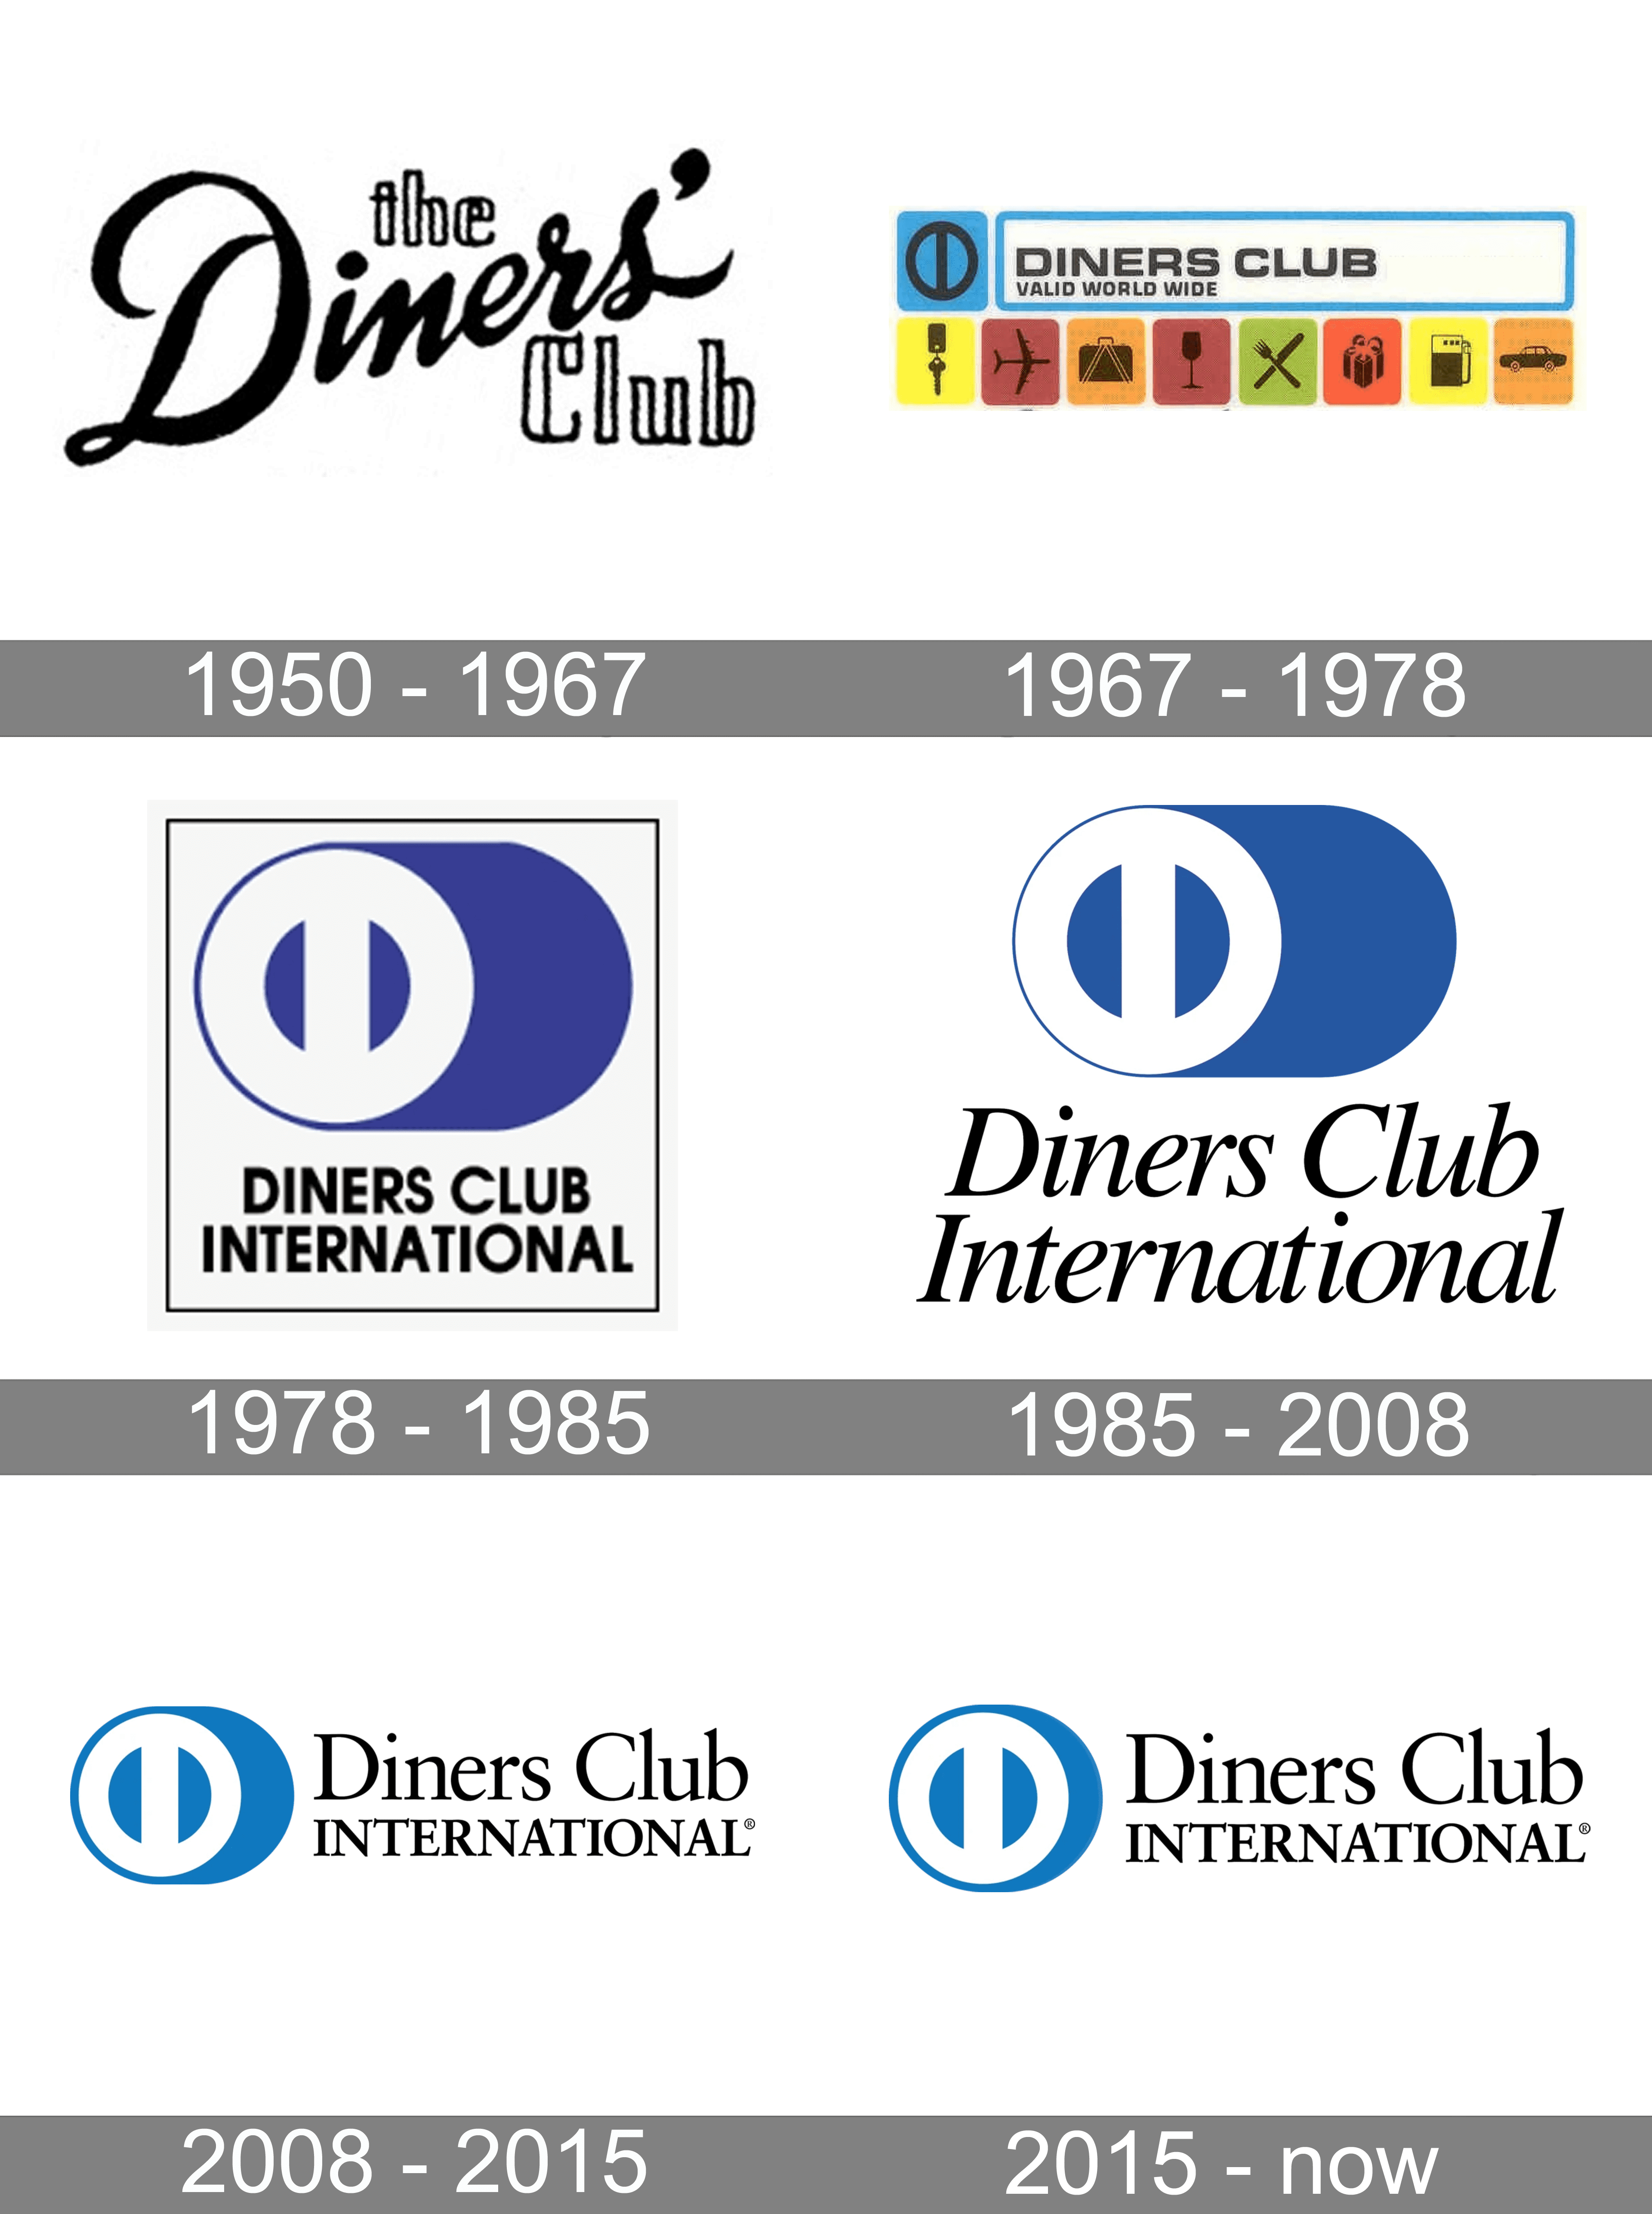 Diners Club International Logo and symbol, meaning, history, PNG, brand